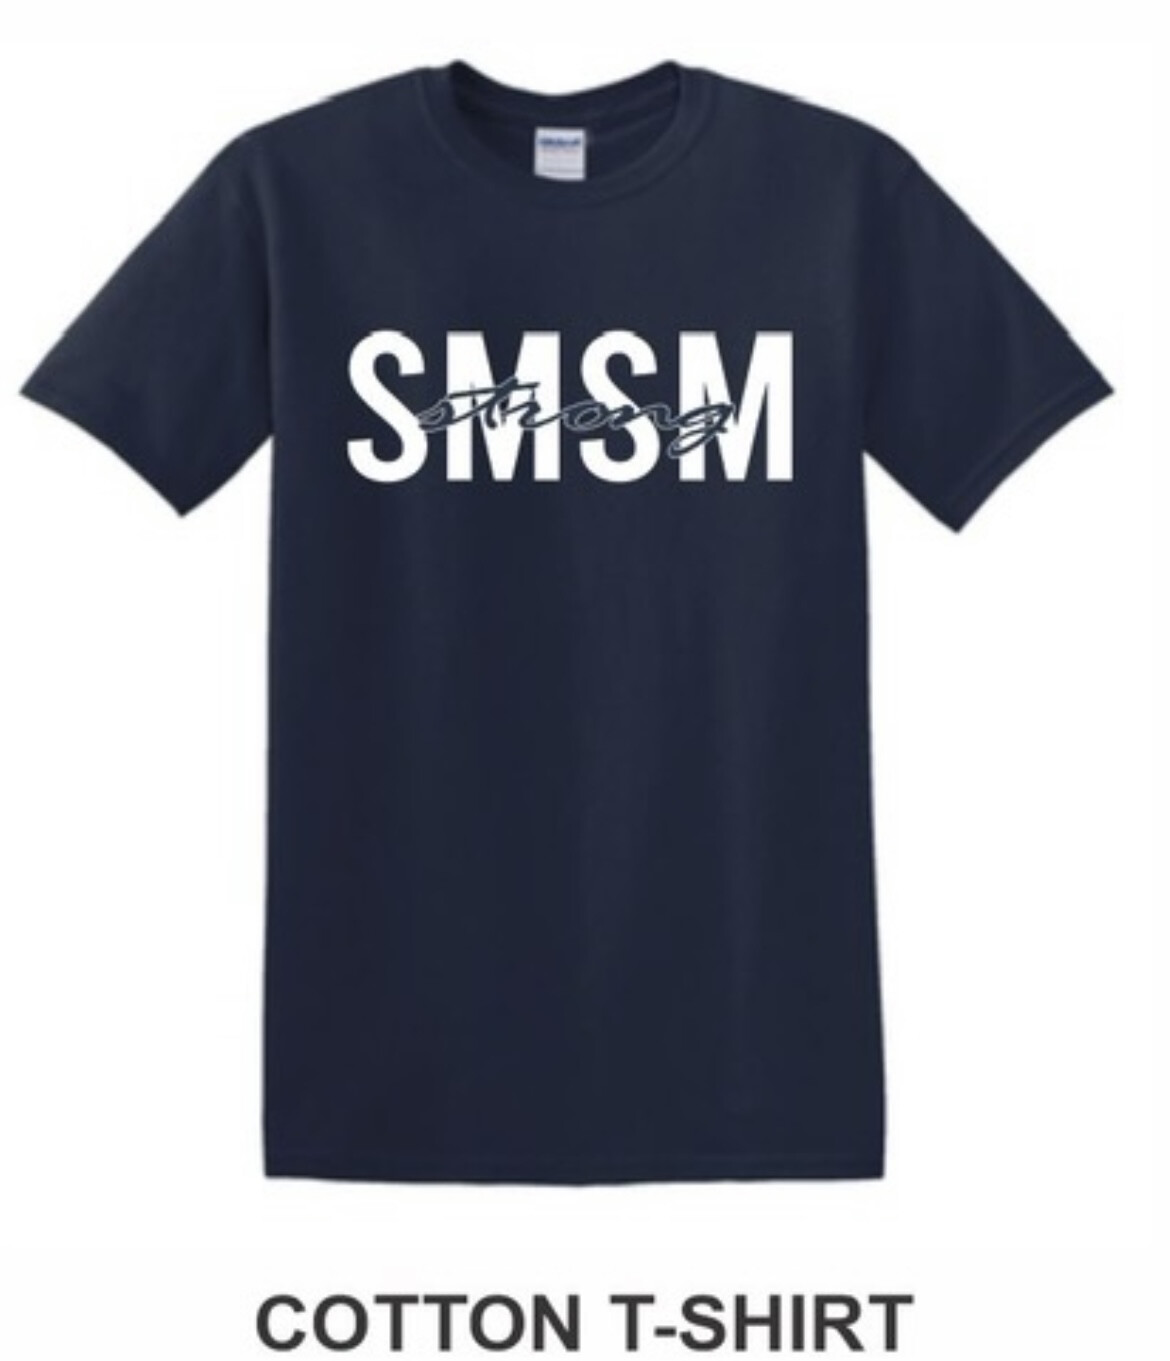 SMSM Strong Short Sleeve T-shirt